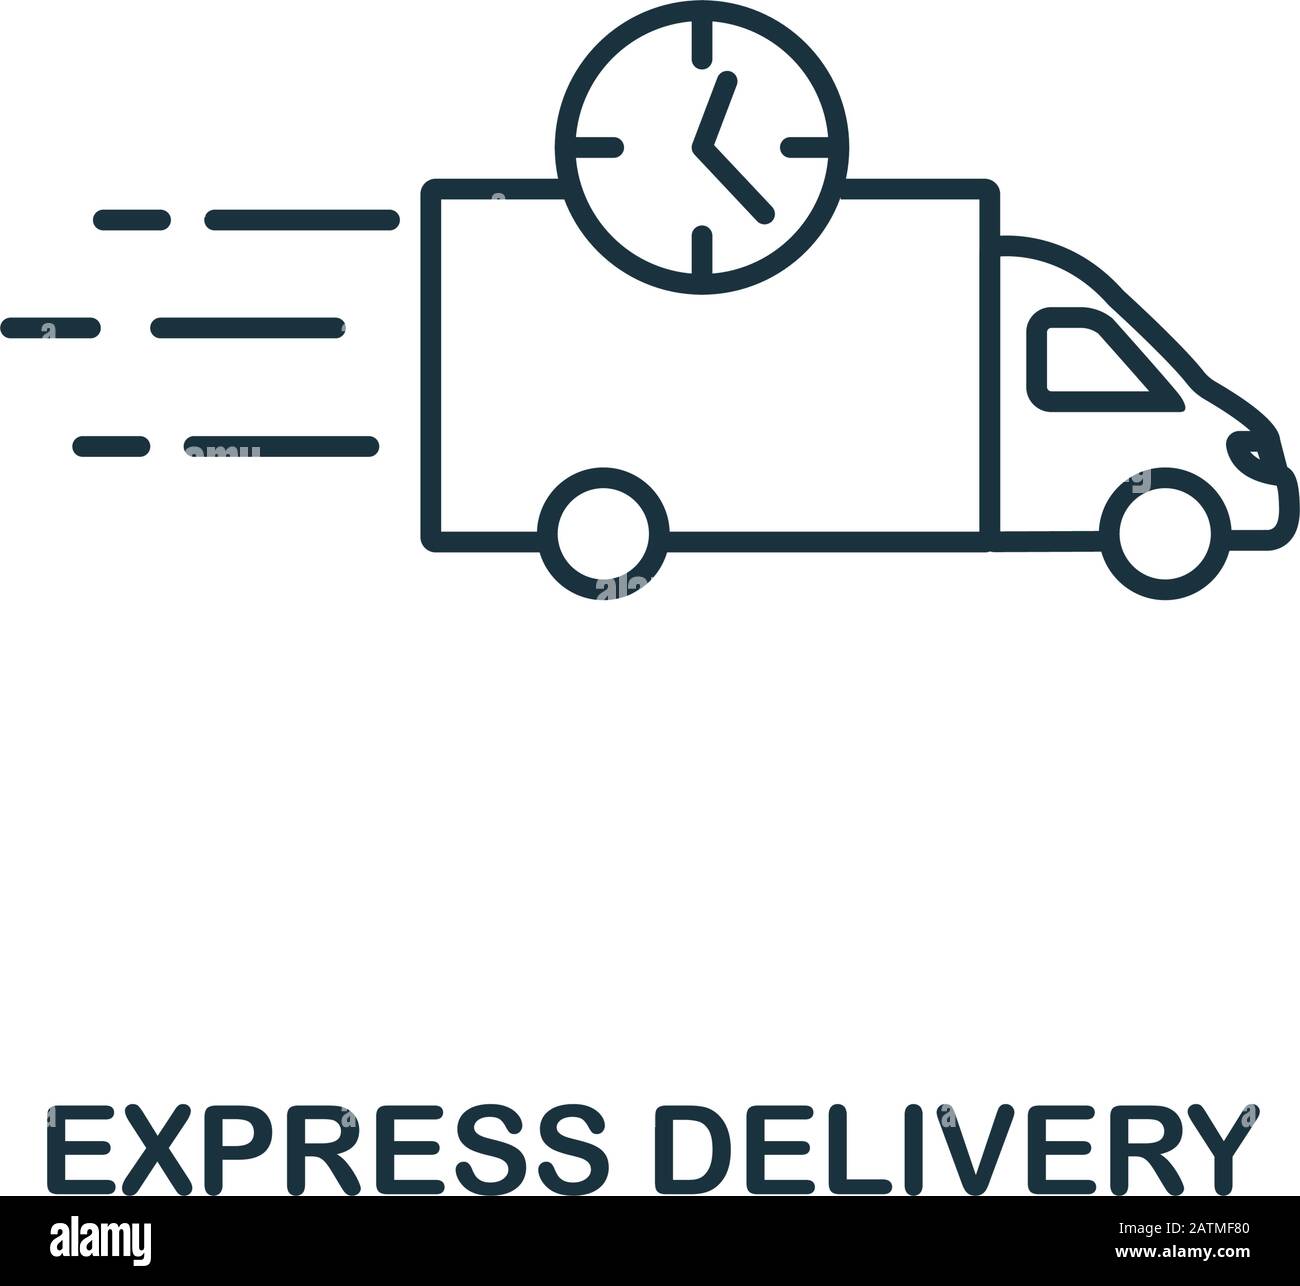 Express Delivery icon. Monochrome style design from logistics